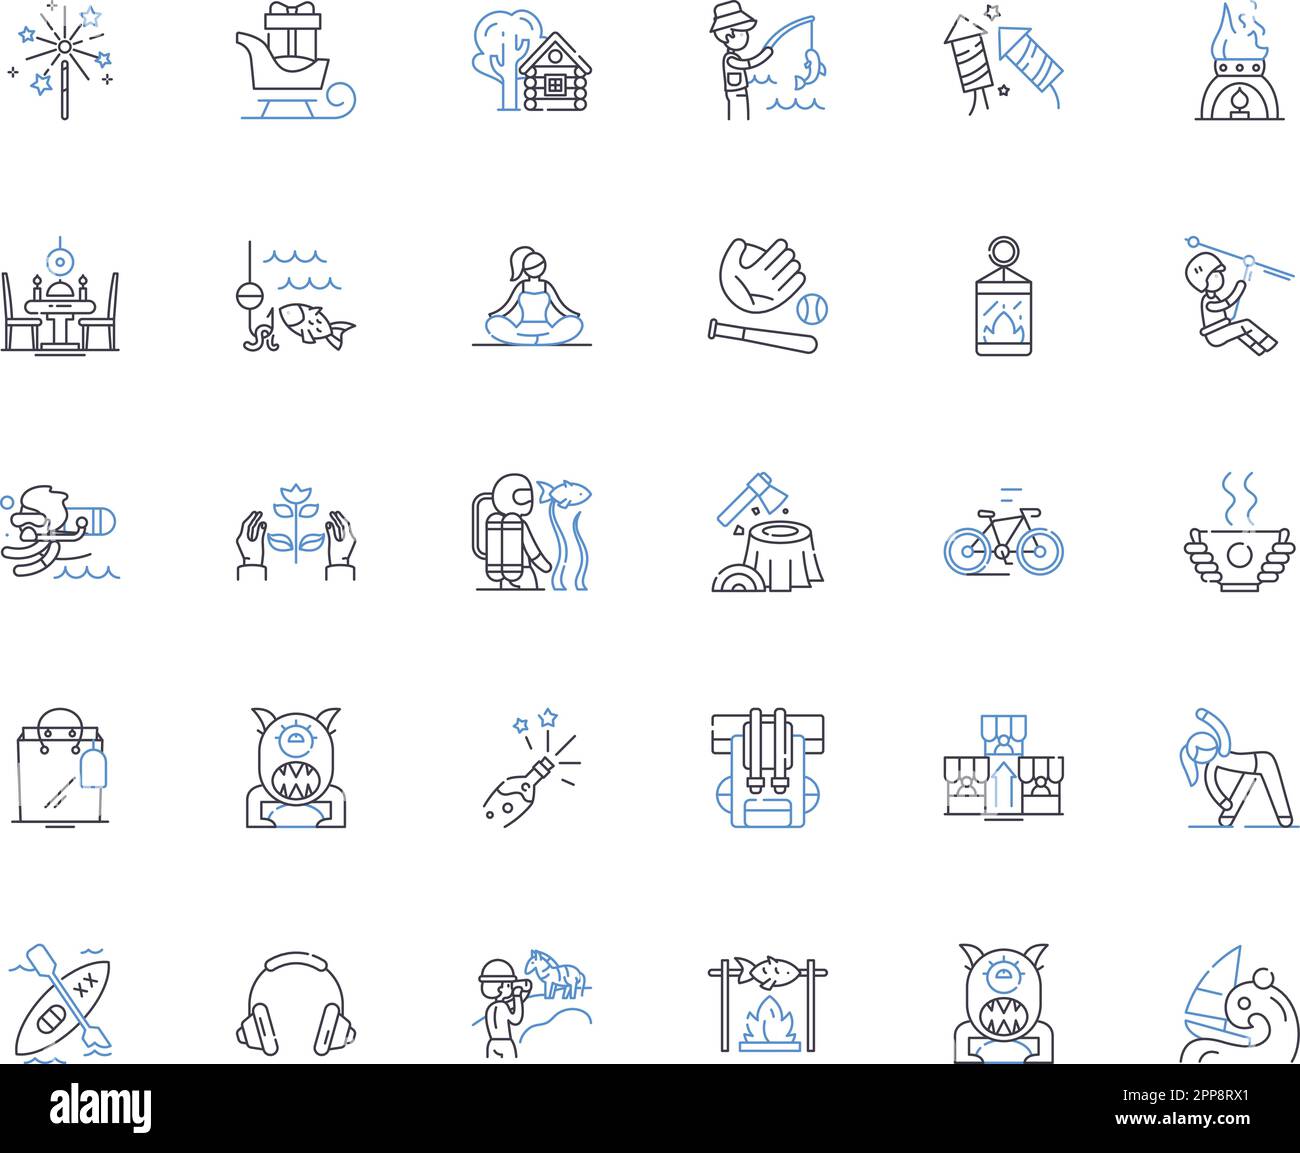 City breaks line icons collection. Adventure, Culture, Sightseeing ...